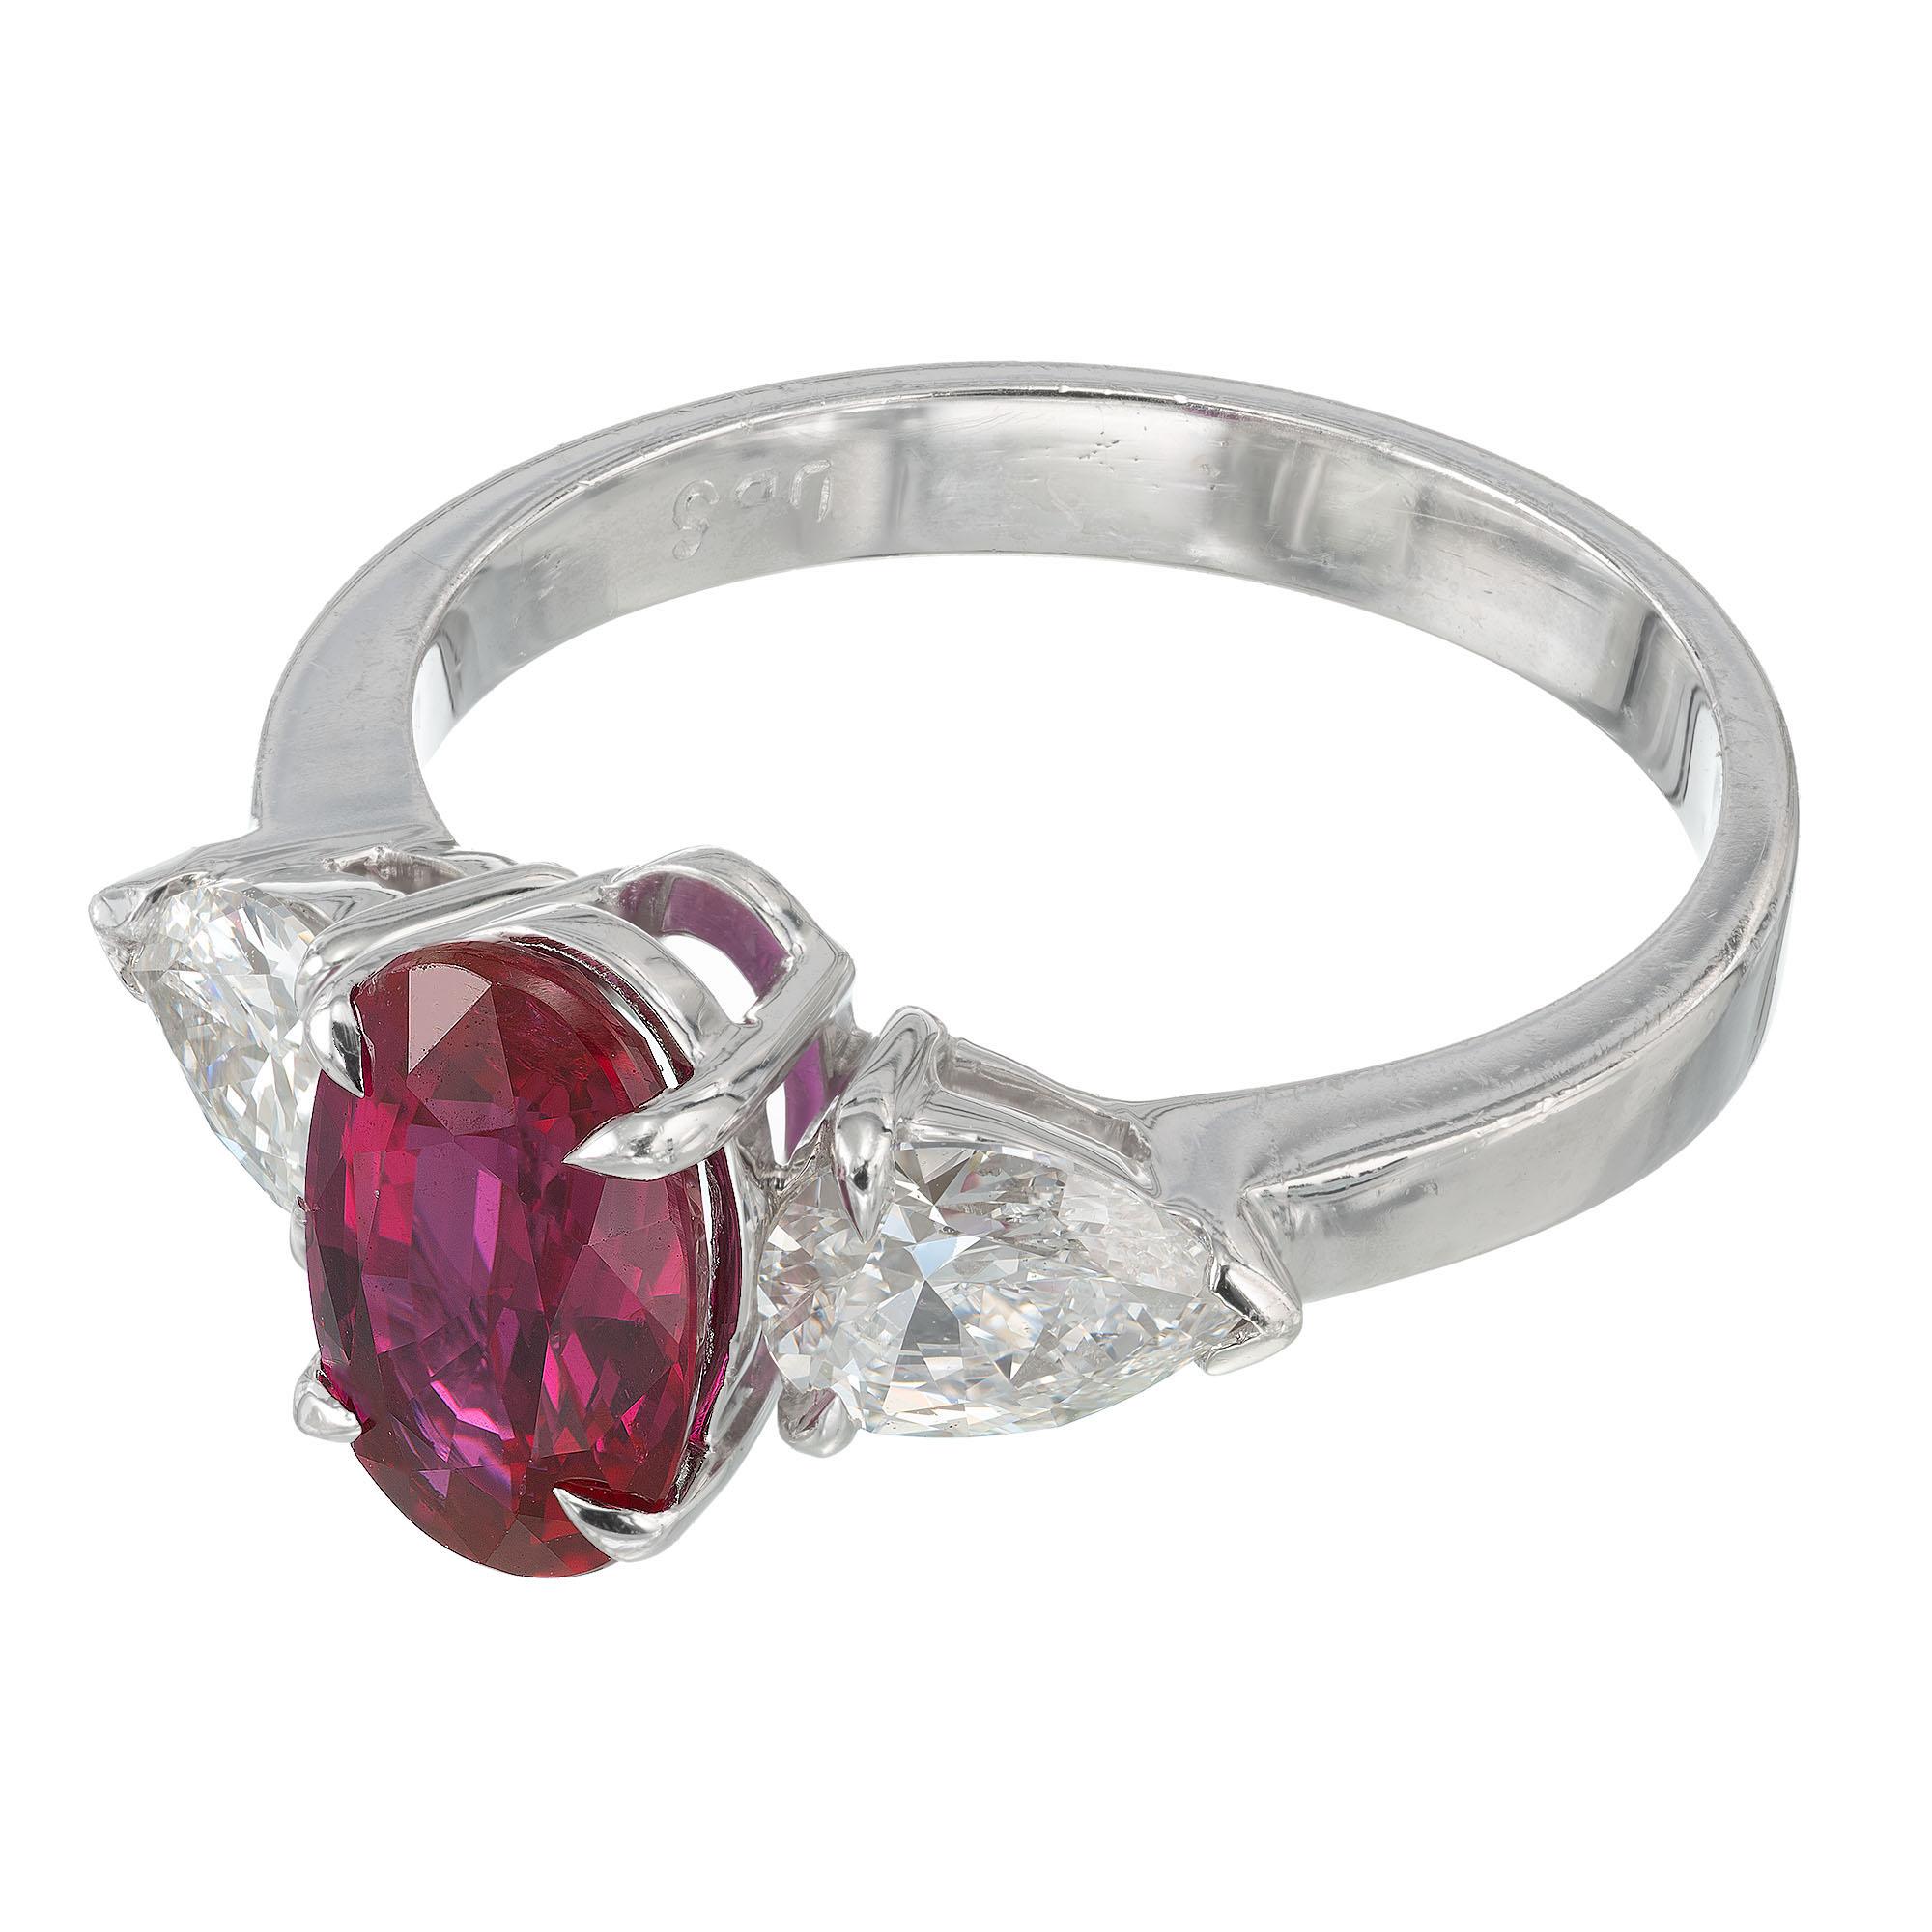 Peter Suchy GIA Certified 2.95 Carat Ruby Diamond Platinum Engagement Ring In Excellent Condition For Sale In Stamford, CT